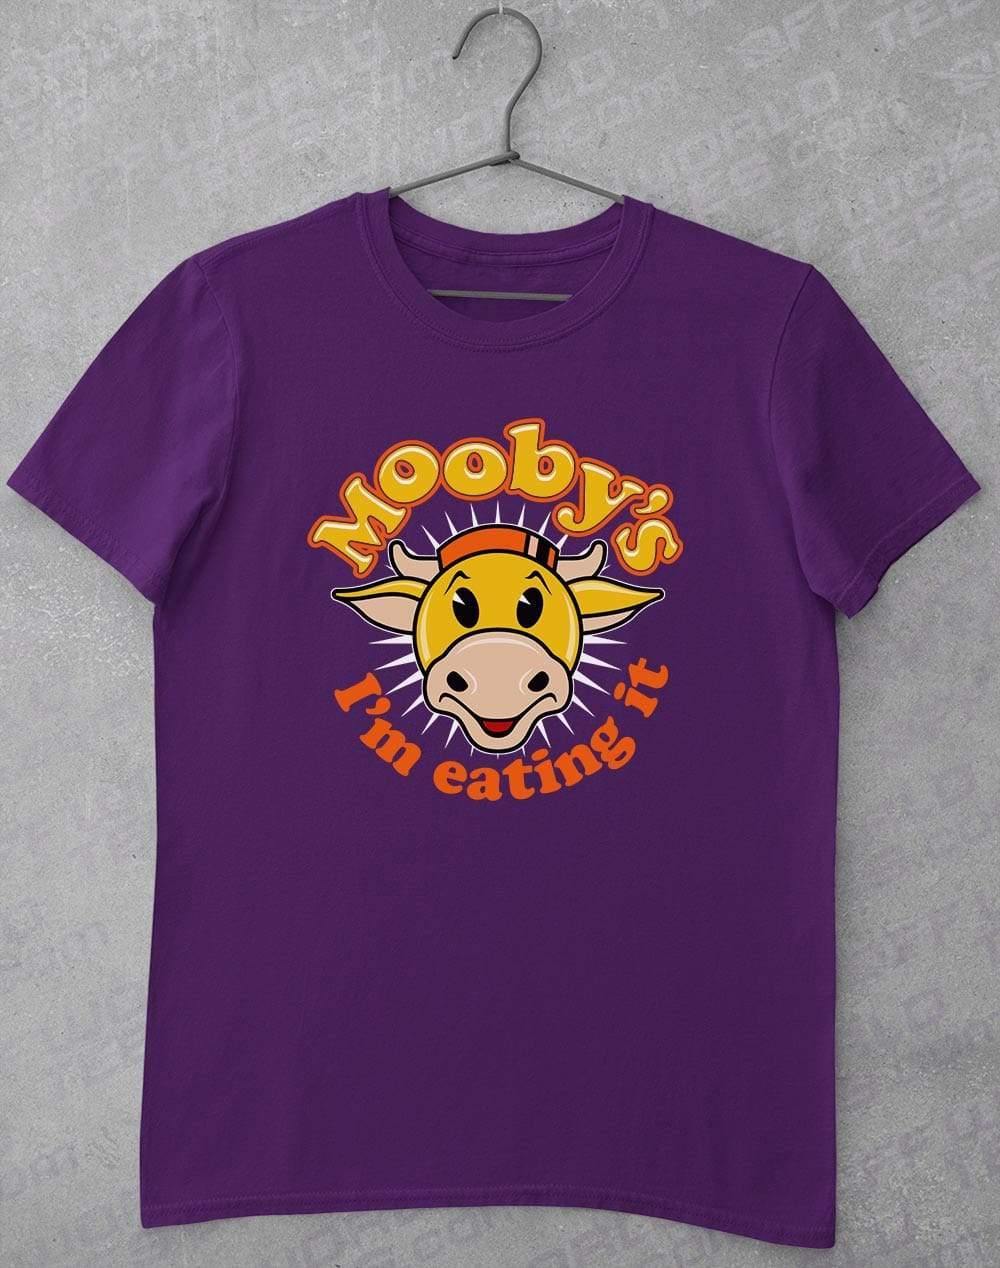 Mooby's T-Shirt S / Purple  - Off World Tees